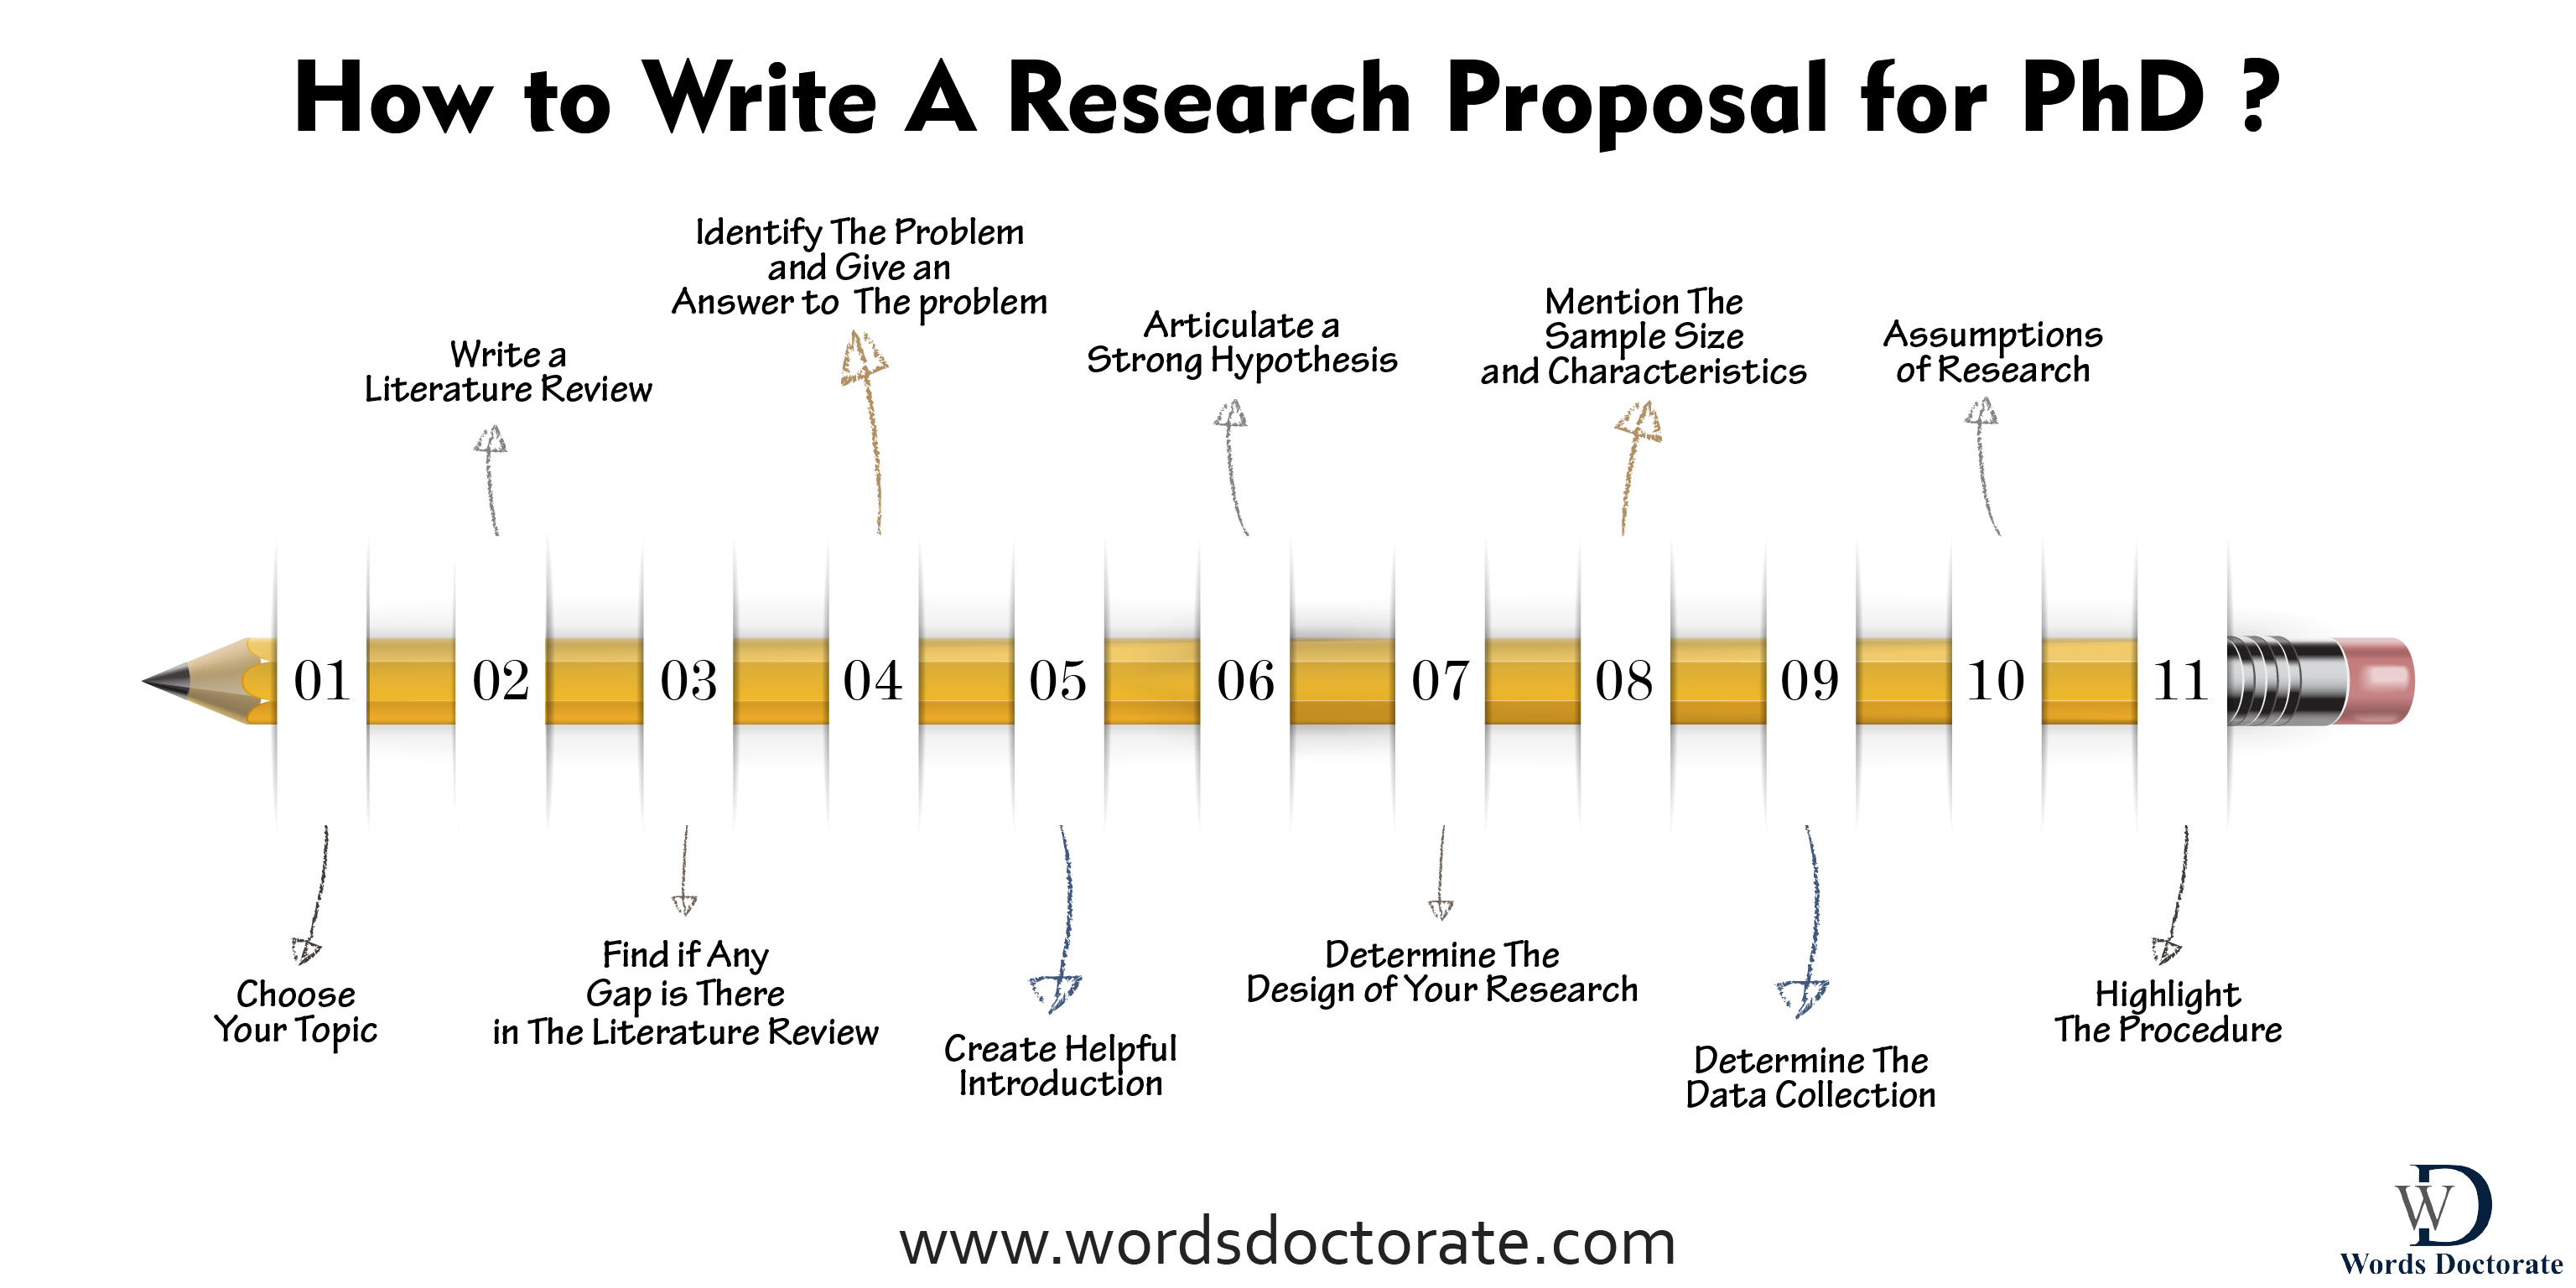 How to Write A Research Proposal for PhD?